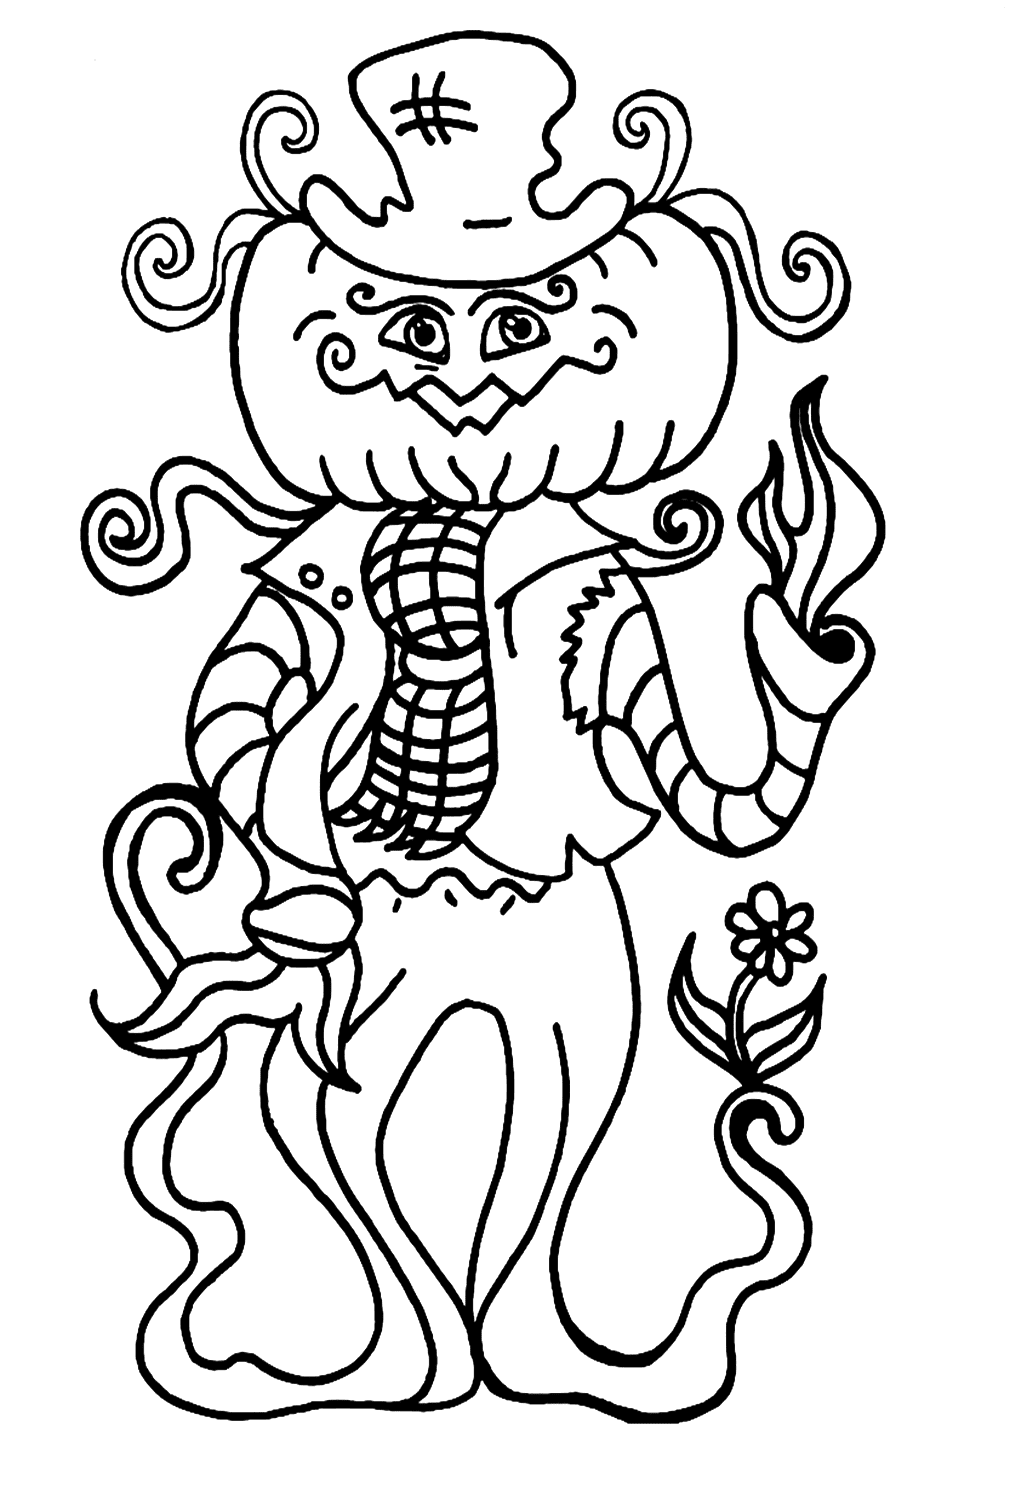 Silly Strawman Coloring Pages